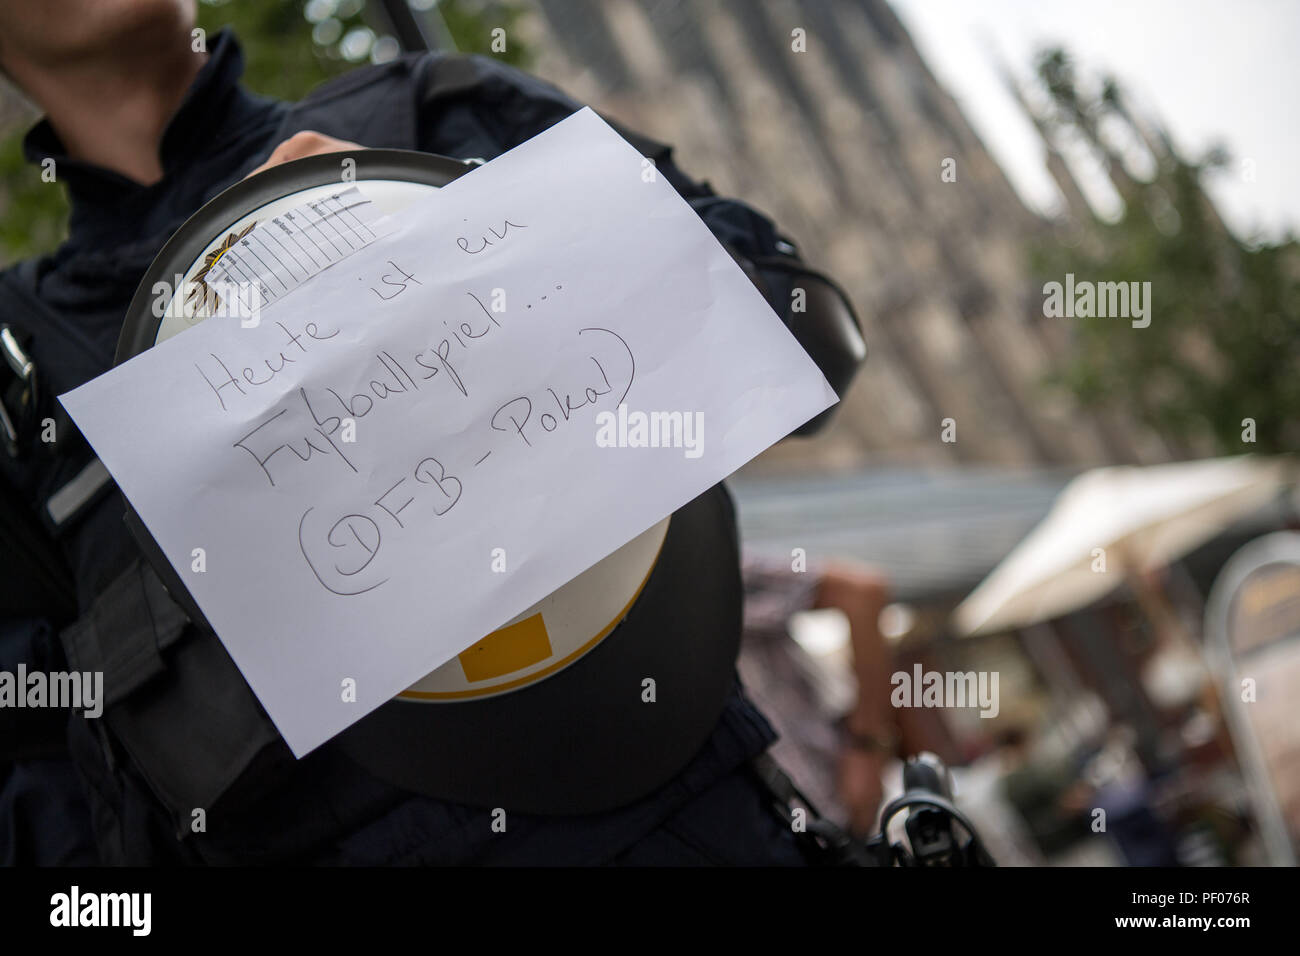 Ulm, Germany. 18th Aug, 2018. A note reading 'Heute ist ein Fussballspiel. (DFB Pokal)' (lit. 'Today is a football mathc.DFB Trophy) is attached to the helmet of a police officer before a football match of the DFB Cup SSV Ulm 1846 against Eintracht Frankfurt. The note is a reaction to the many inquiries from citizens of Ulm as to why so many police are on the move in the city. Credit: Sebastian Gollnow/dpa/Alamy Live News Stock Photo